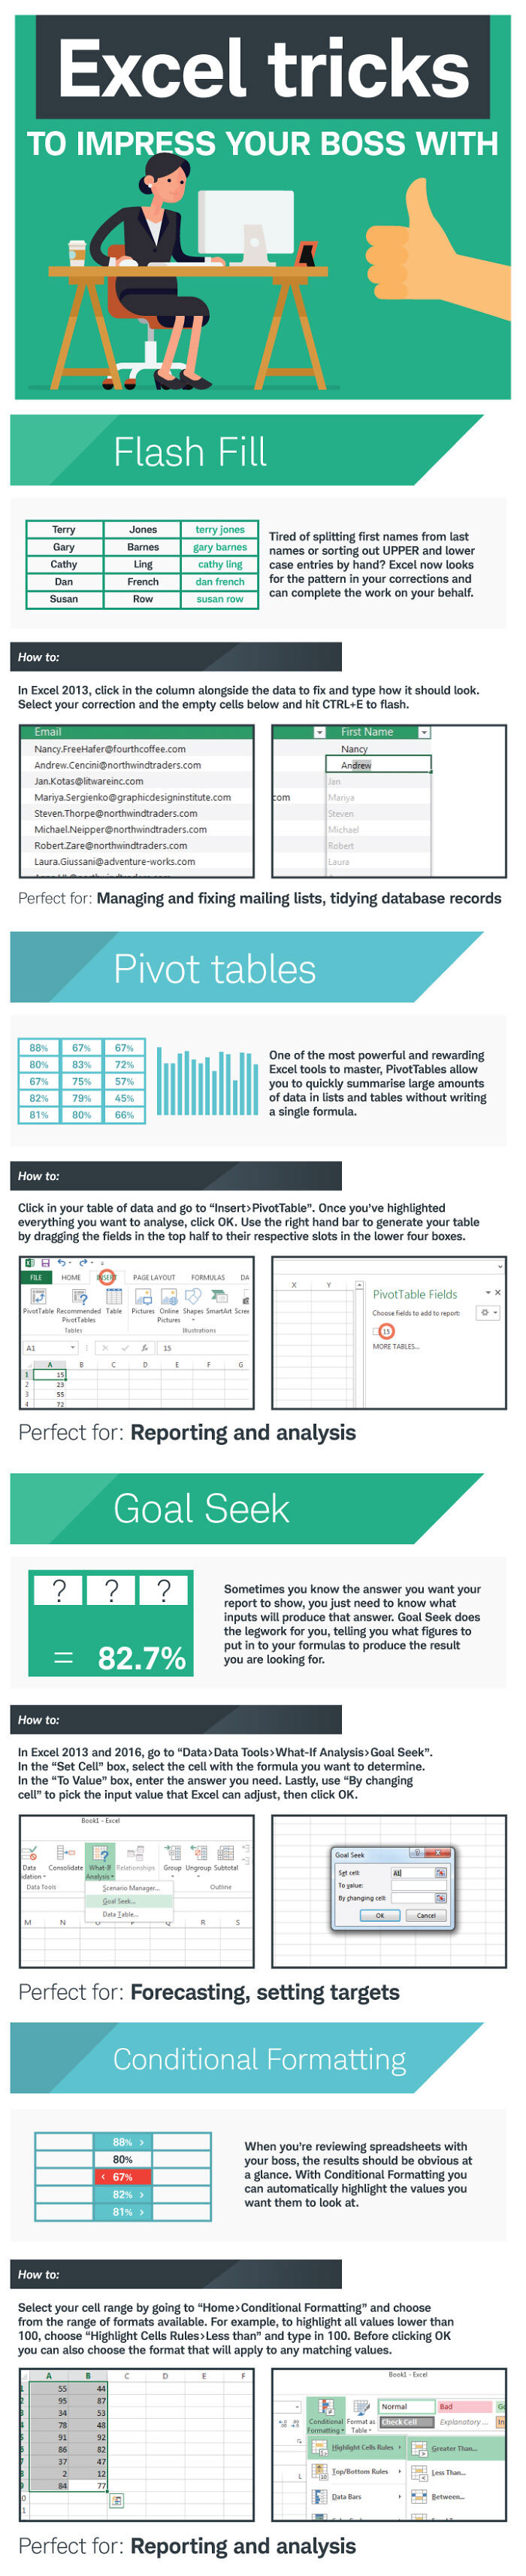 Excel Tricks To Impress Your Boss